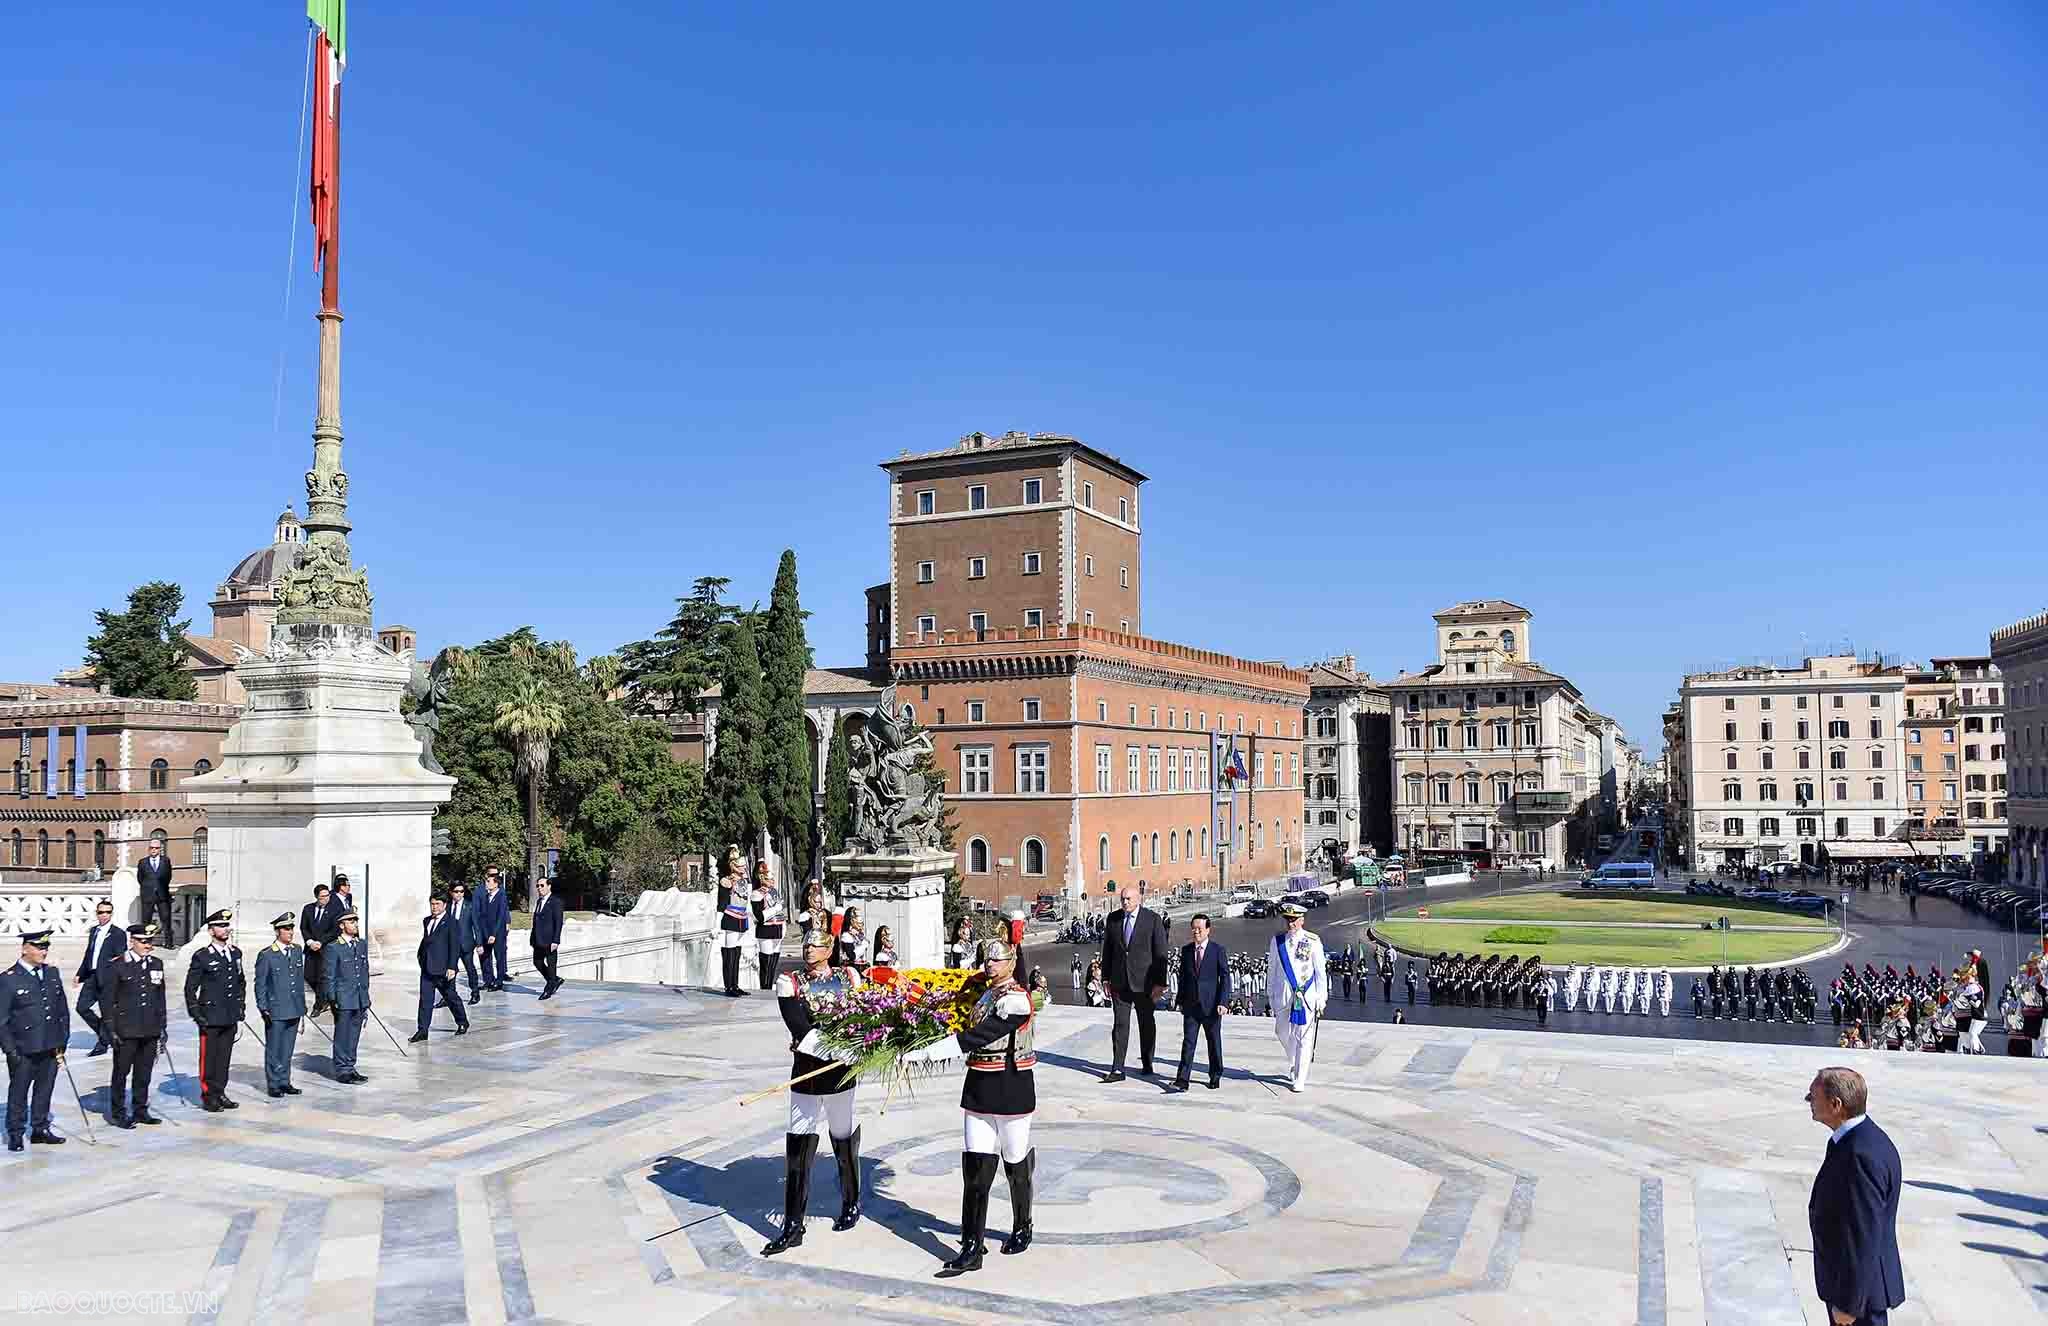 President Vo Van Thuong pays floral tribute at national monument in Rome